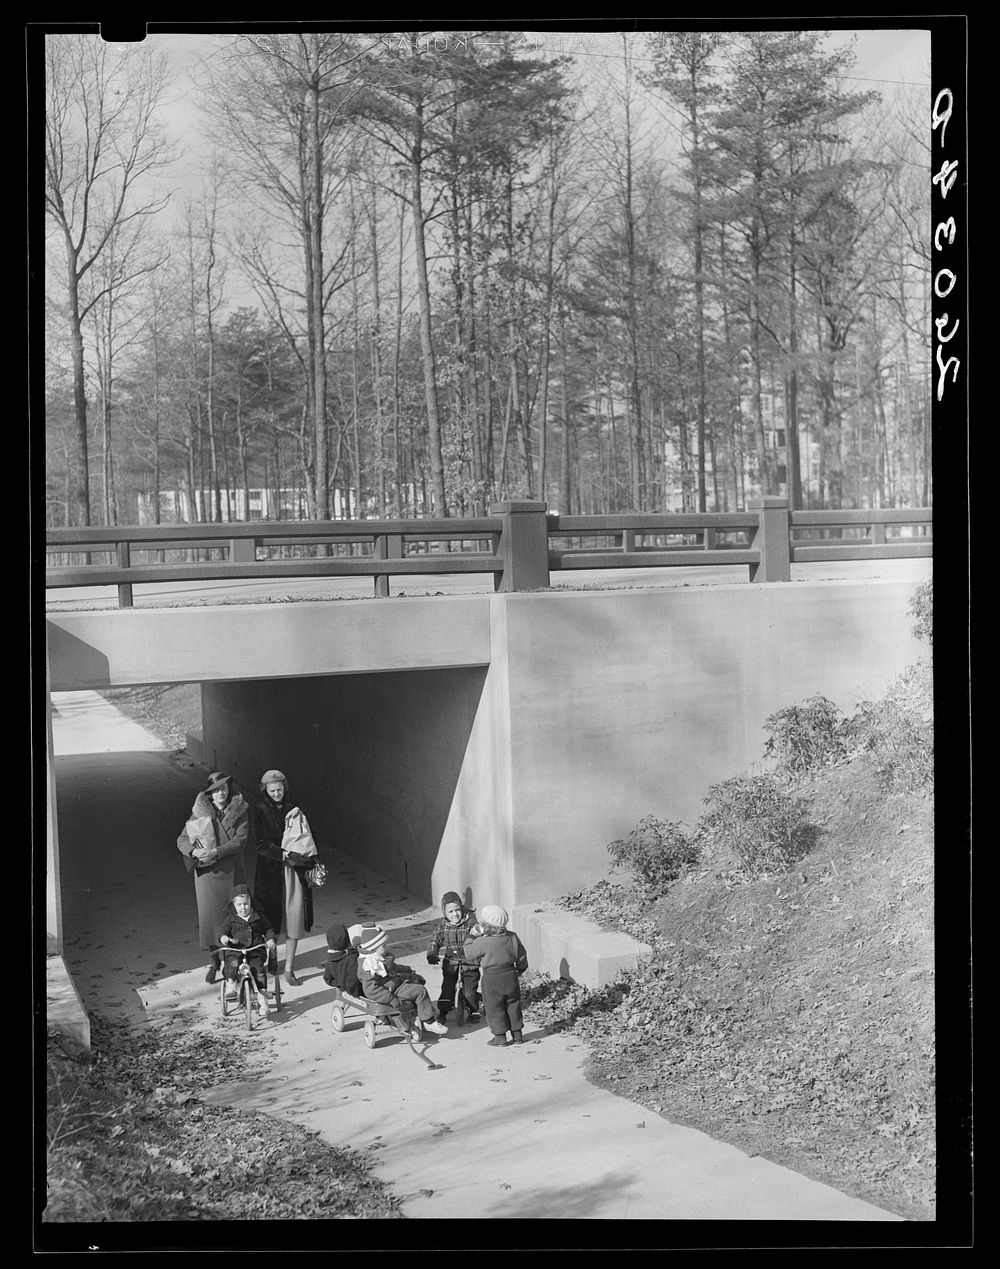 Underpass. Greenbelt, Maryland. Sourced from the Library of Congress.